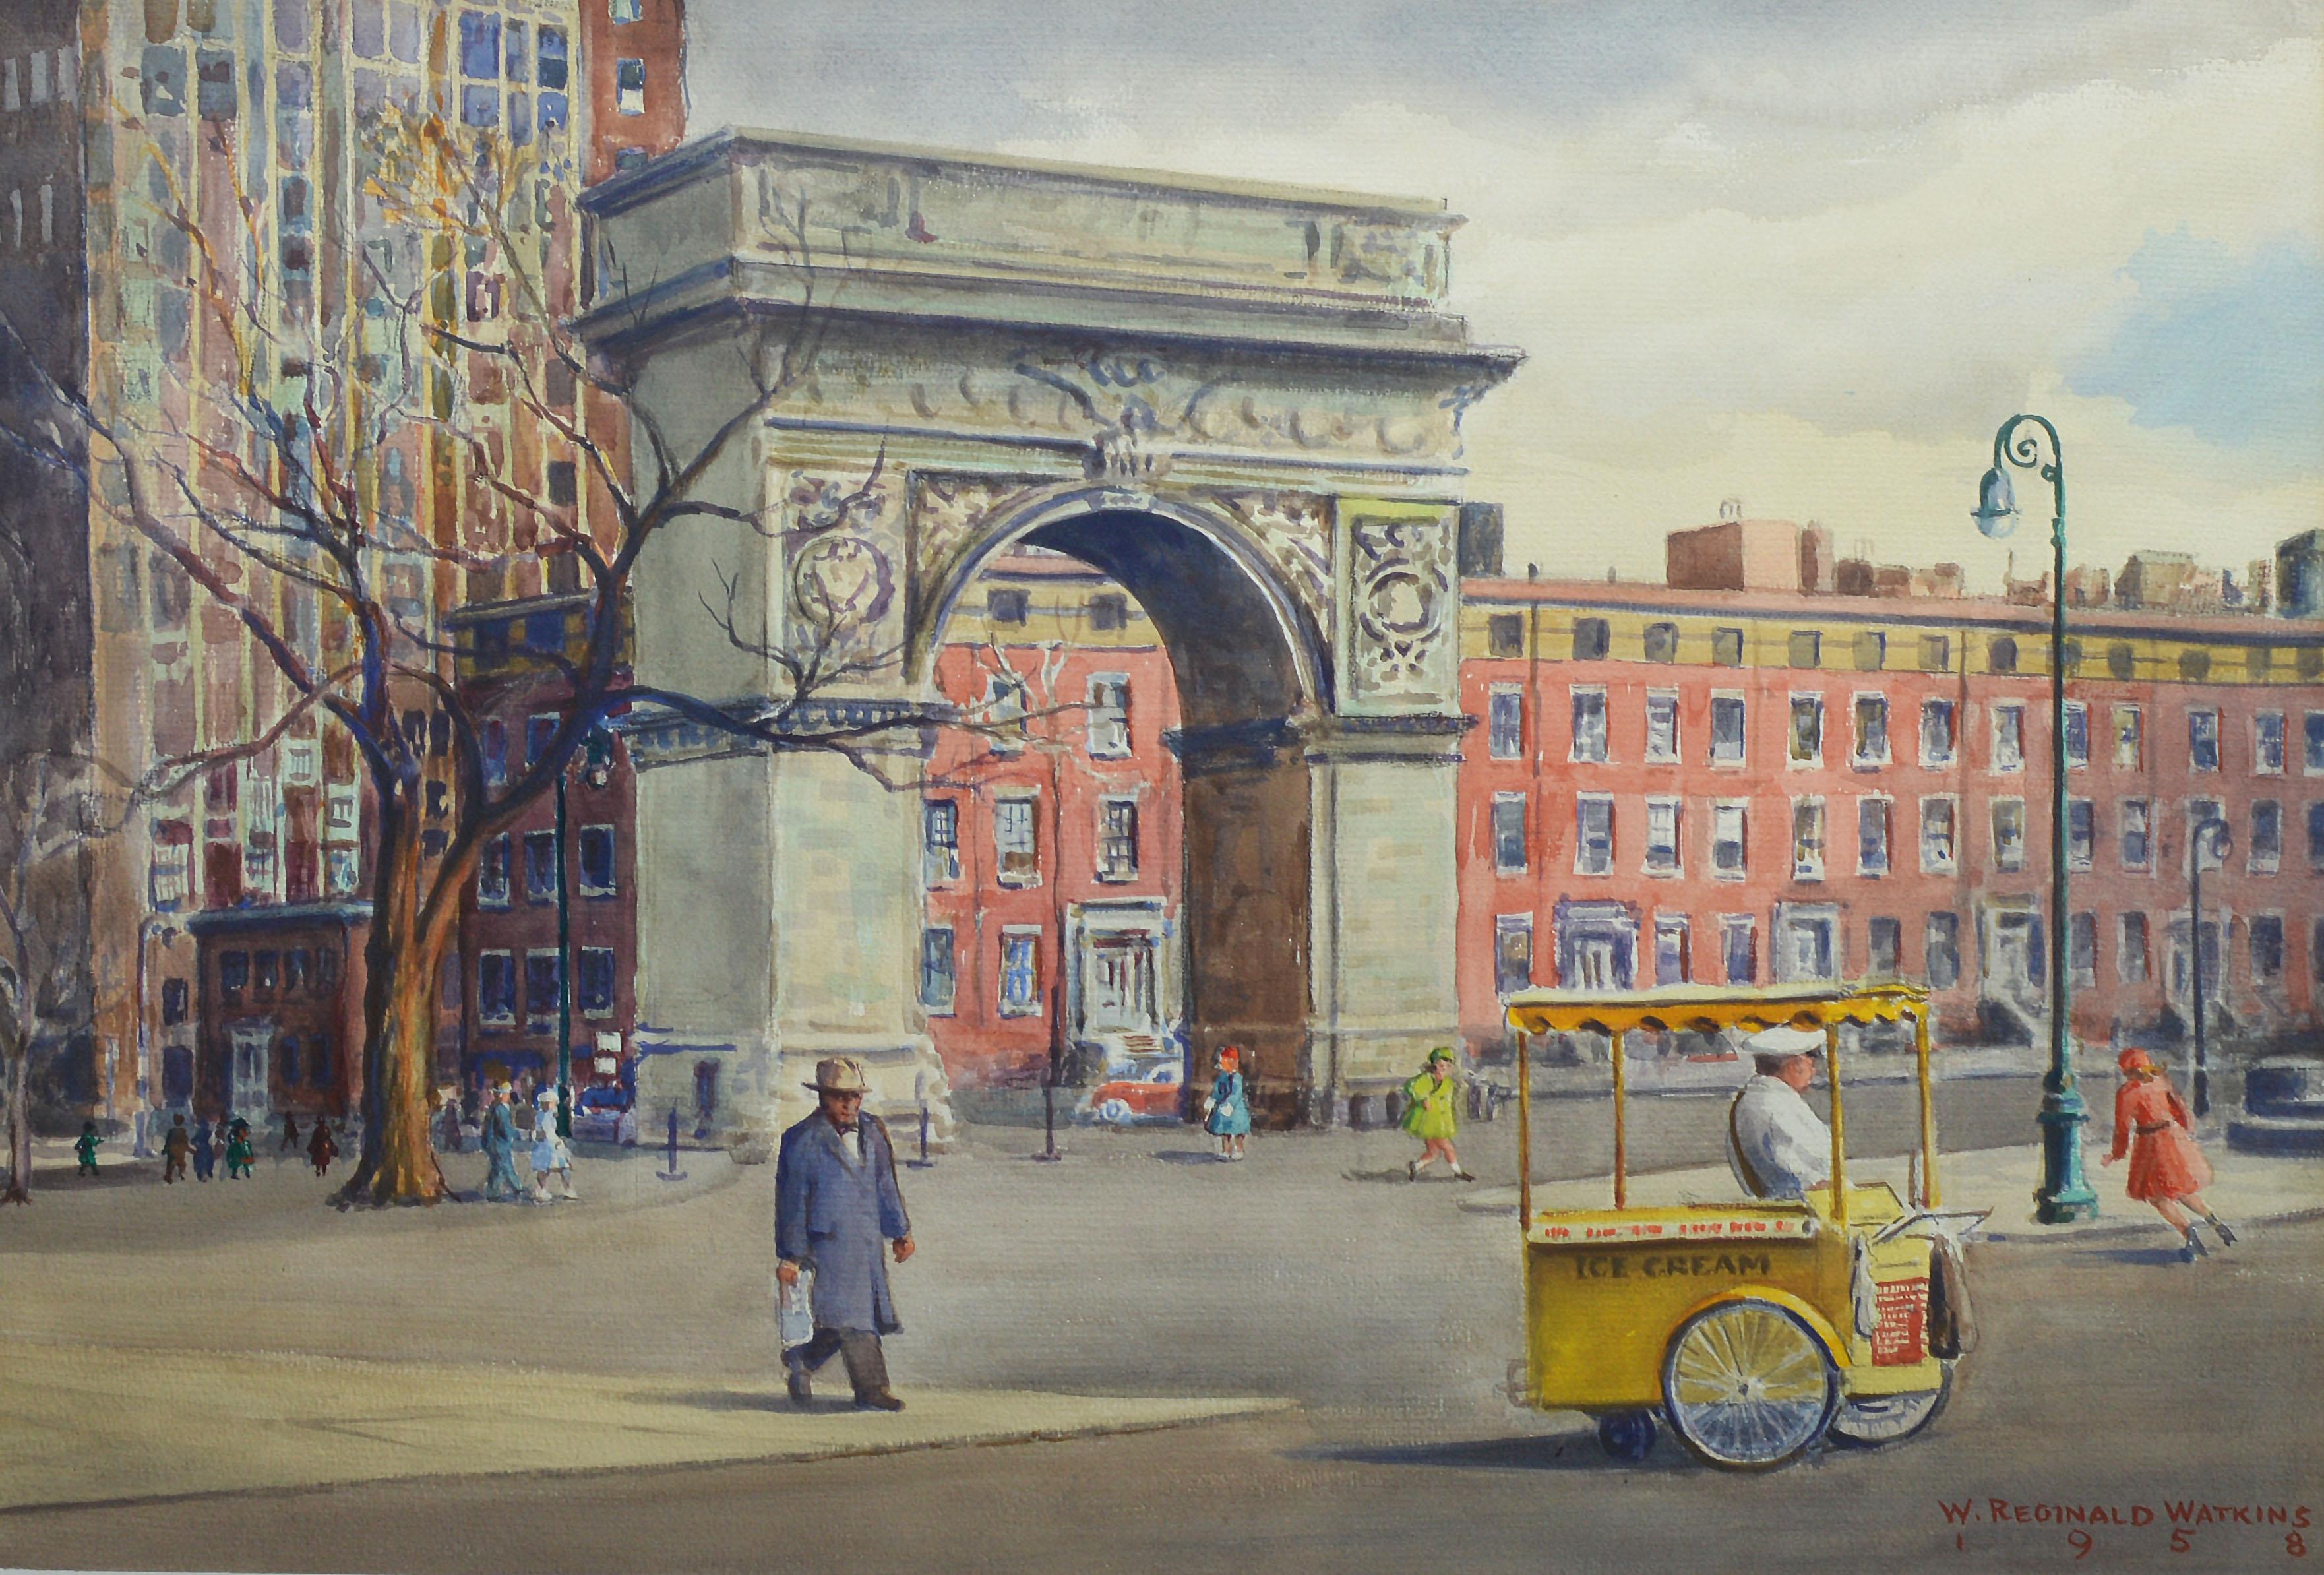 Vintage American modernist painting of Washington Square Park by William Watkins  (1890 - 1985).  Watercolor and gouache on paper, circa 1958.  Signed.  Displayed in a gold frame.  Image, 28